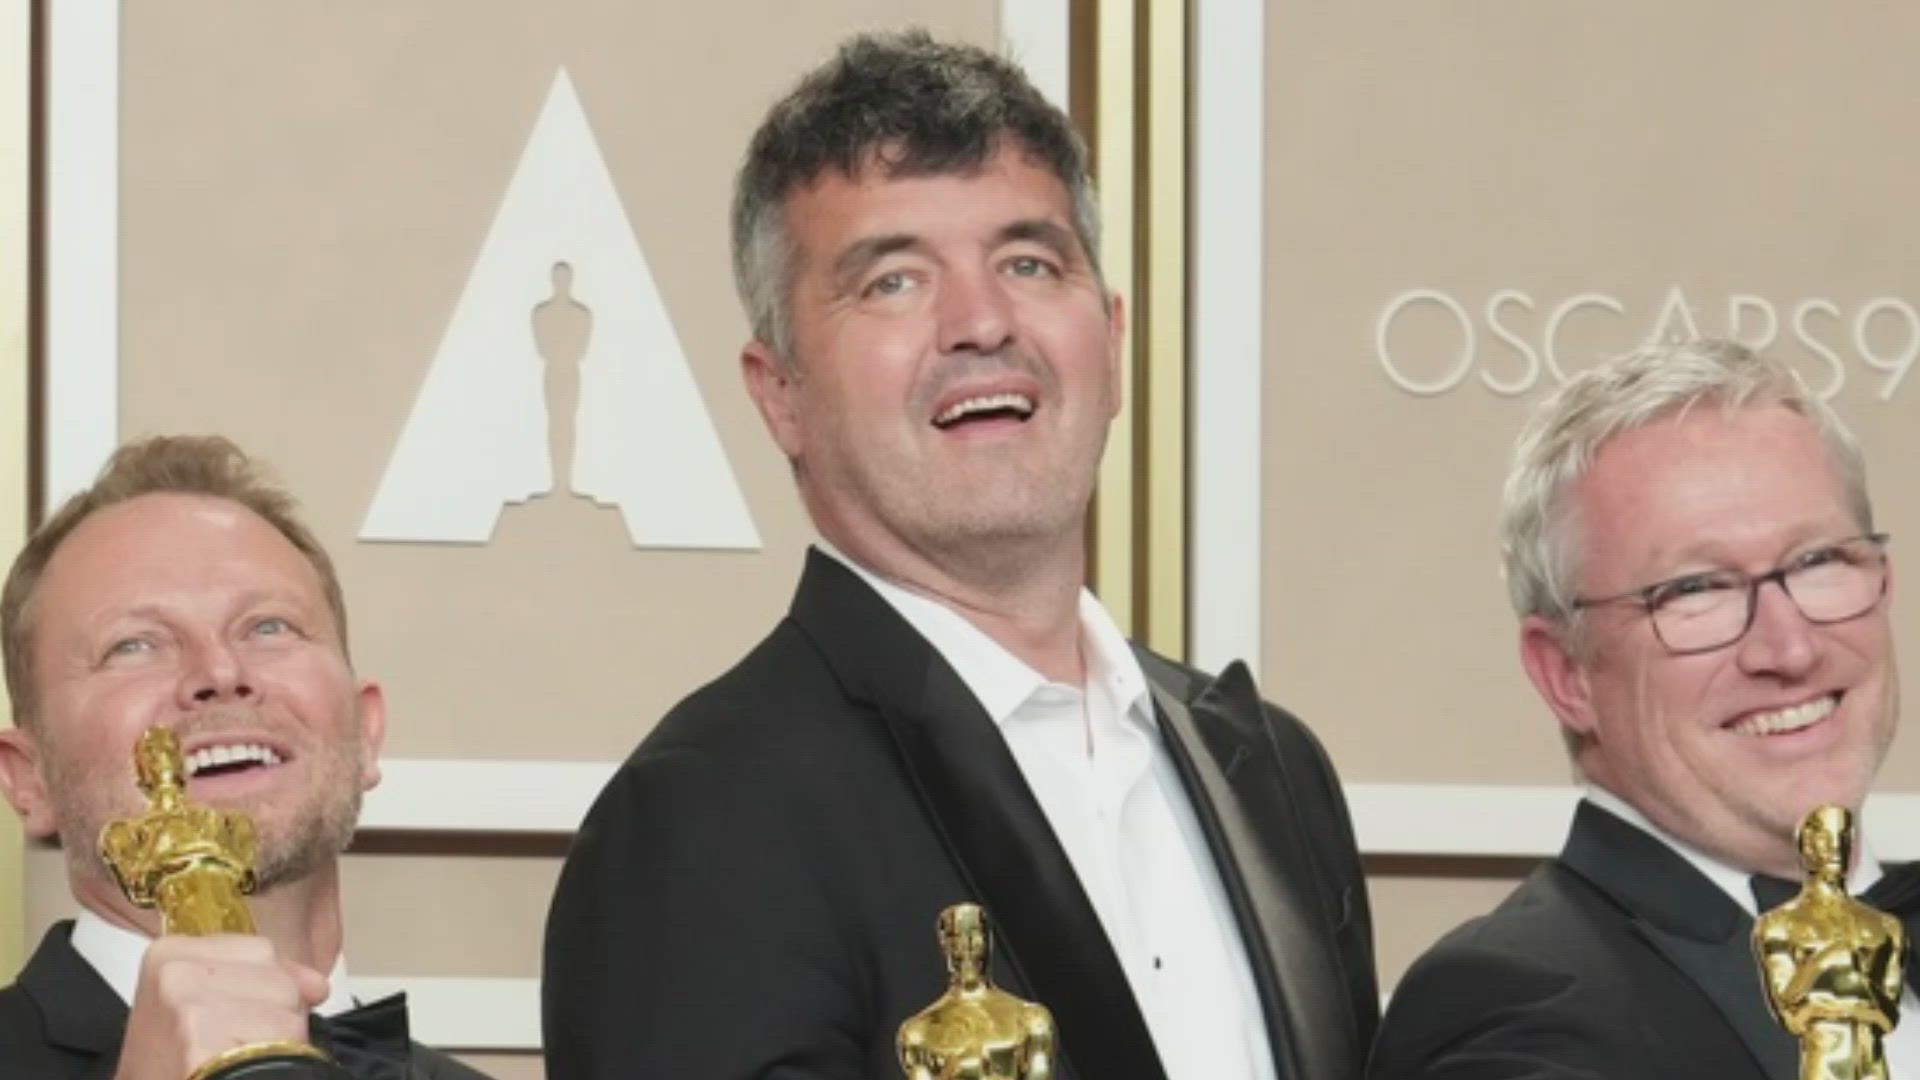 Erin Saindon, who grew up in Gorham, won an Oscar for Best Visual Effects for "Avatar: The Way of Water." Shortly after, he was hospitalized, his family says.